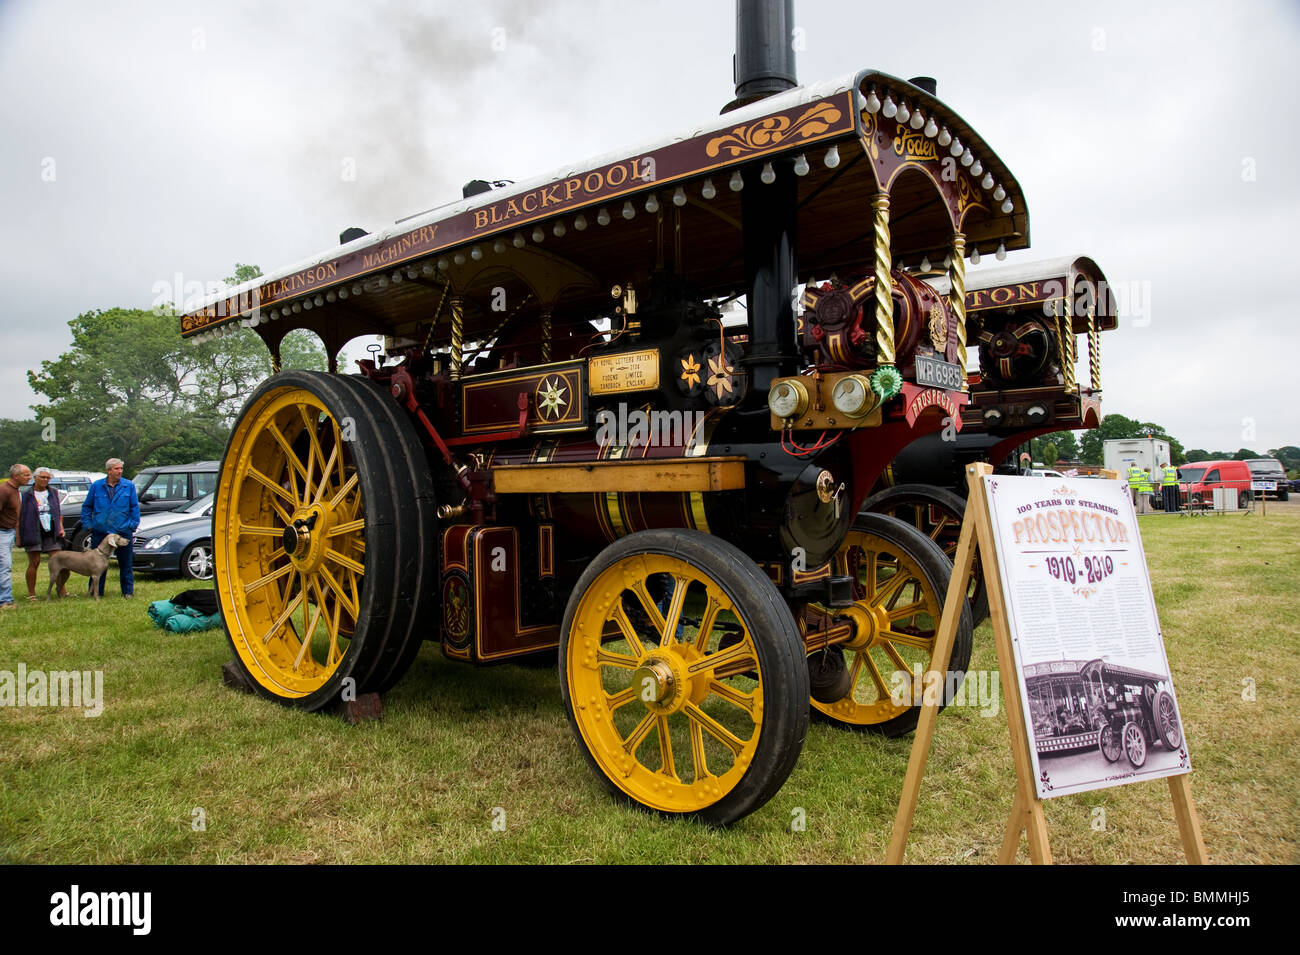 A Foden Showman's engine at Heskin Hall traction engine and vintage vehicle rally Stock Photo